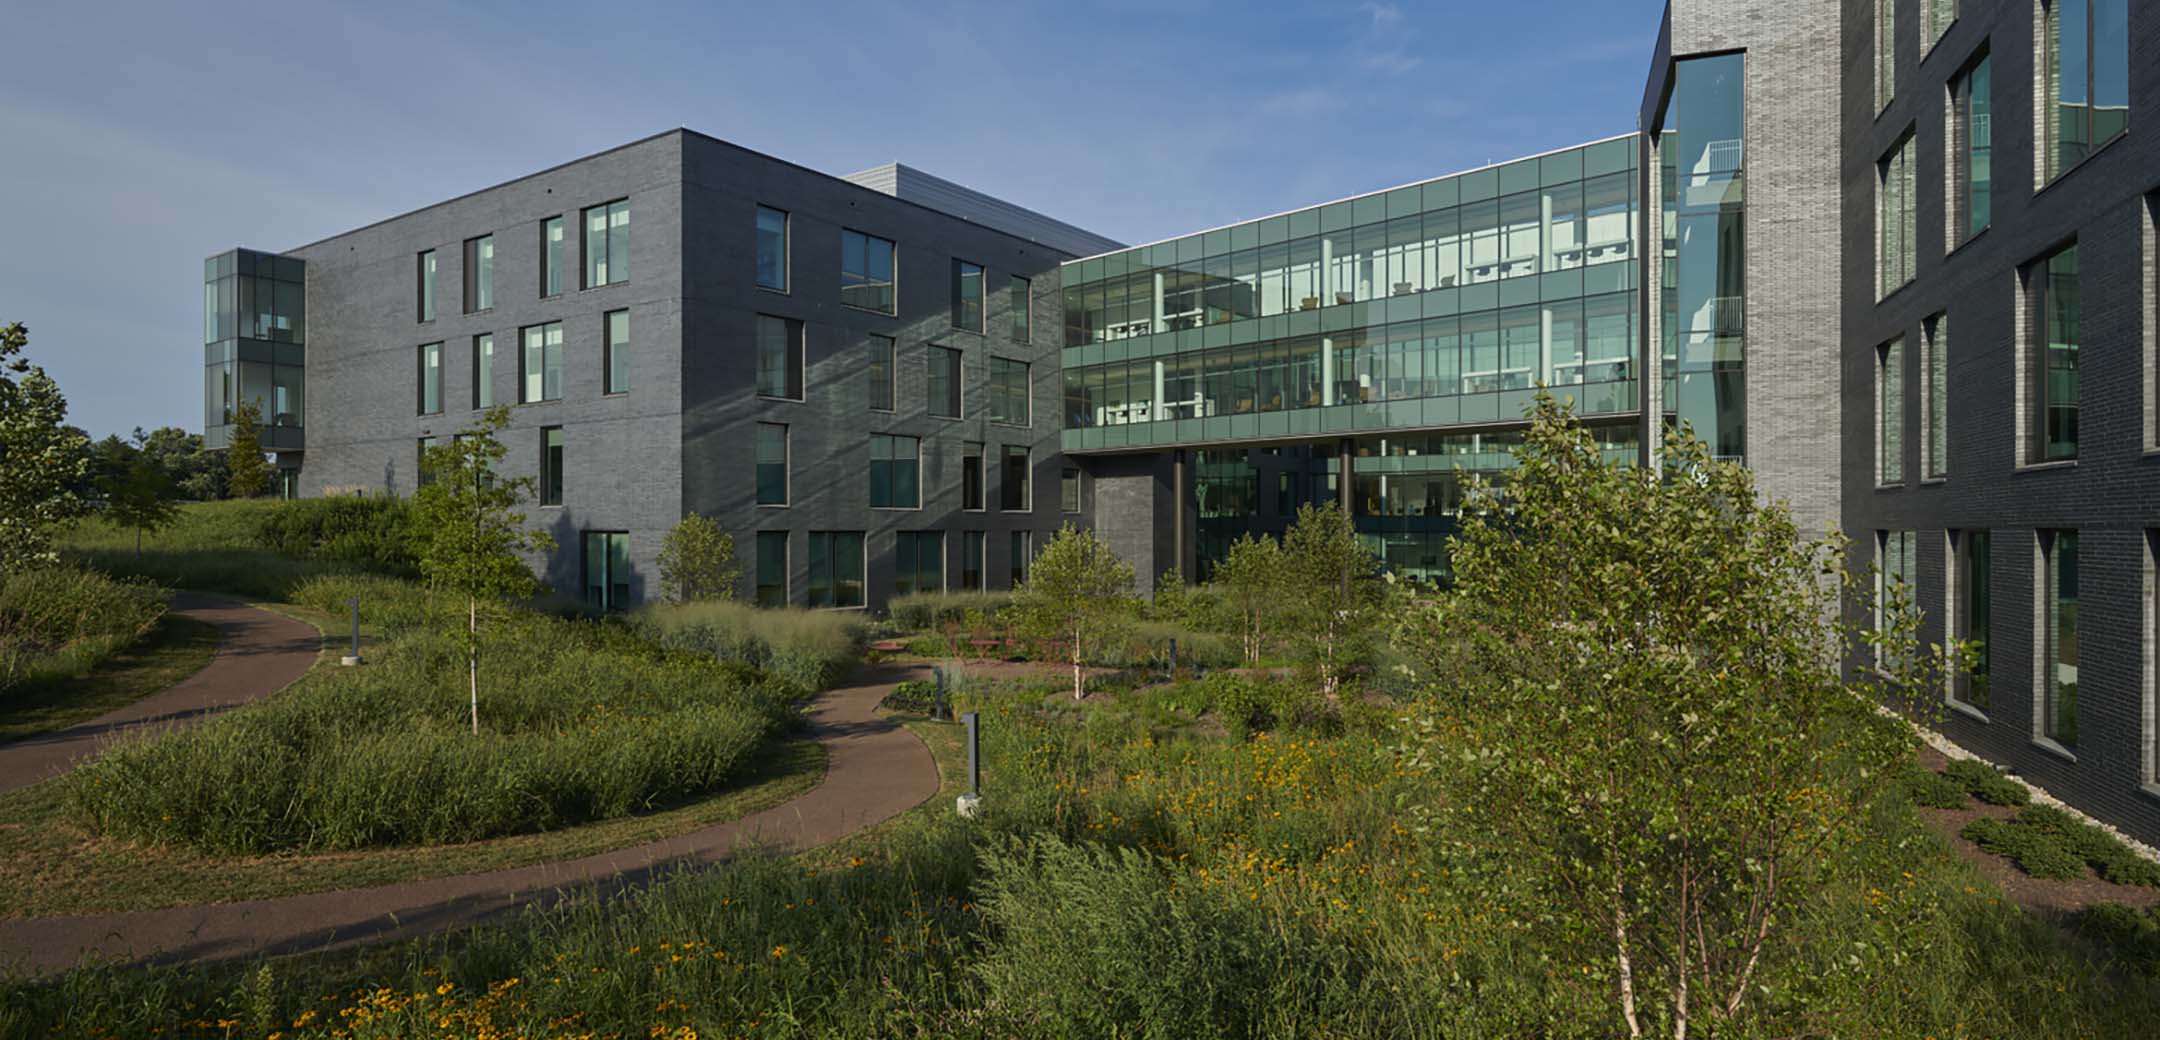 A back view of the Advanced Outpatient Care Center building showcasing the glass connecting bridge and back garden path with bushes and flowers.